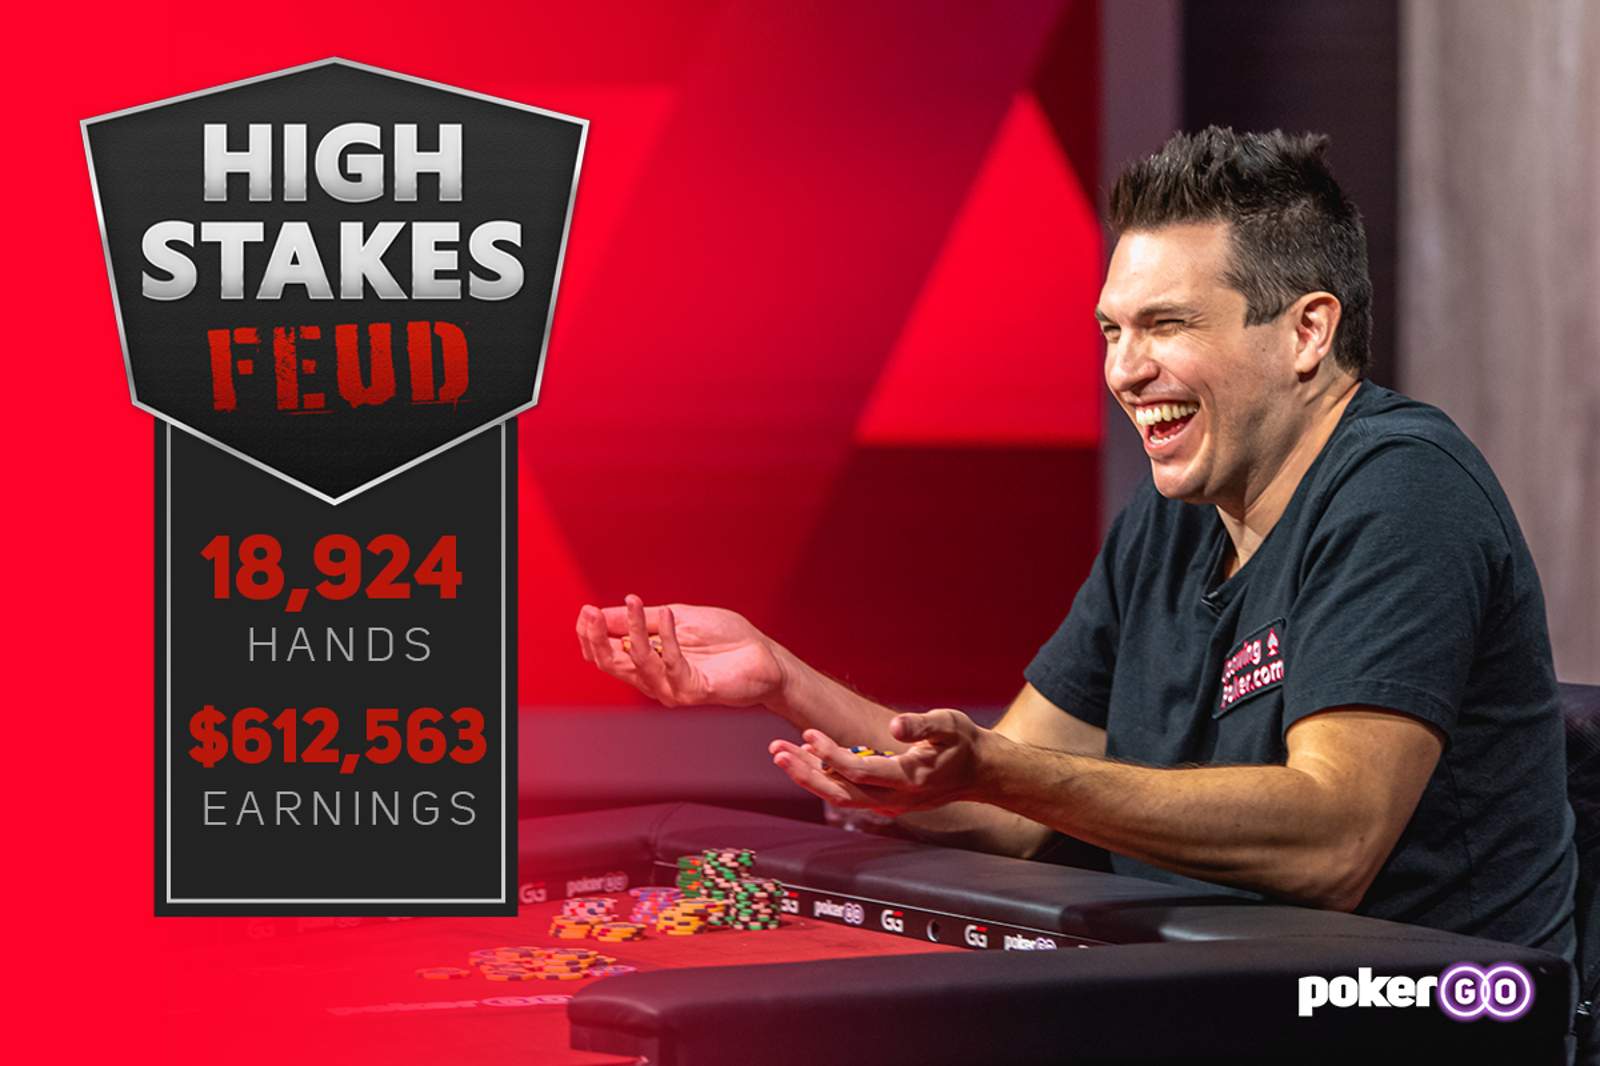 Doug Polk Leads Daniel Negreanu by $612,563 After 18,924 Hands in High Stakes Feud